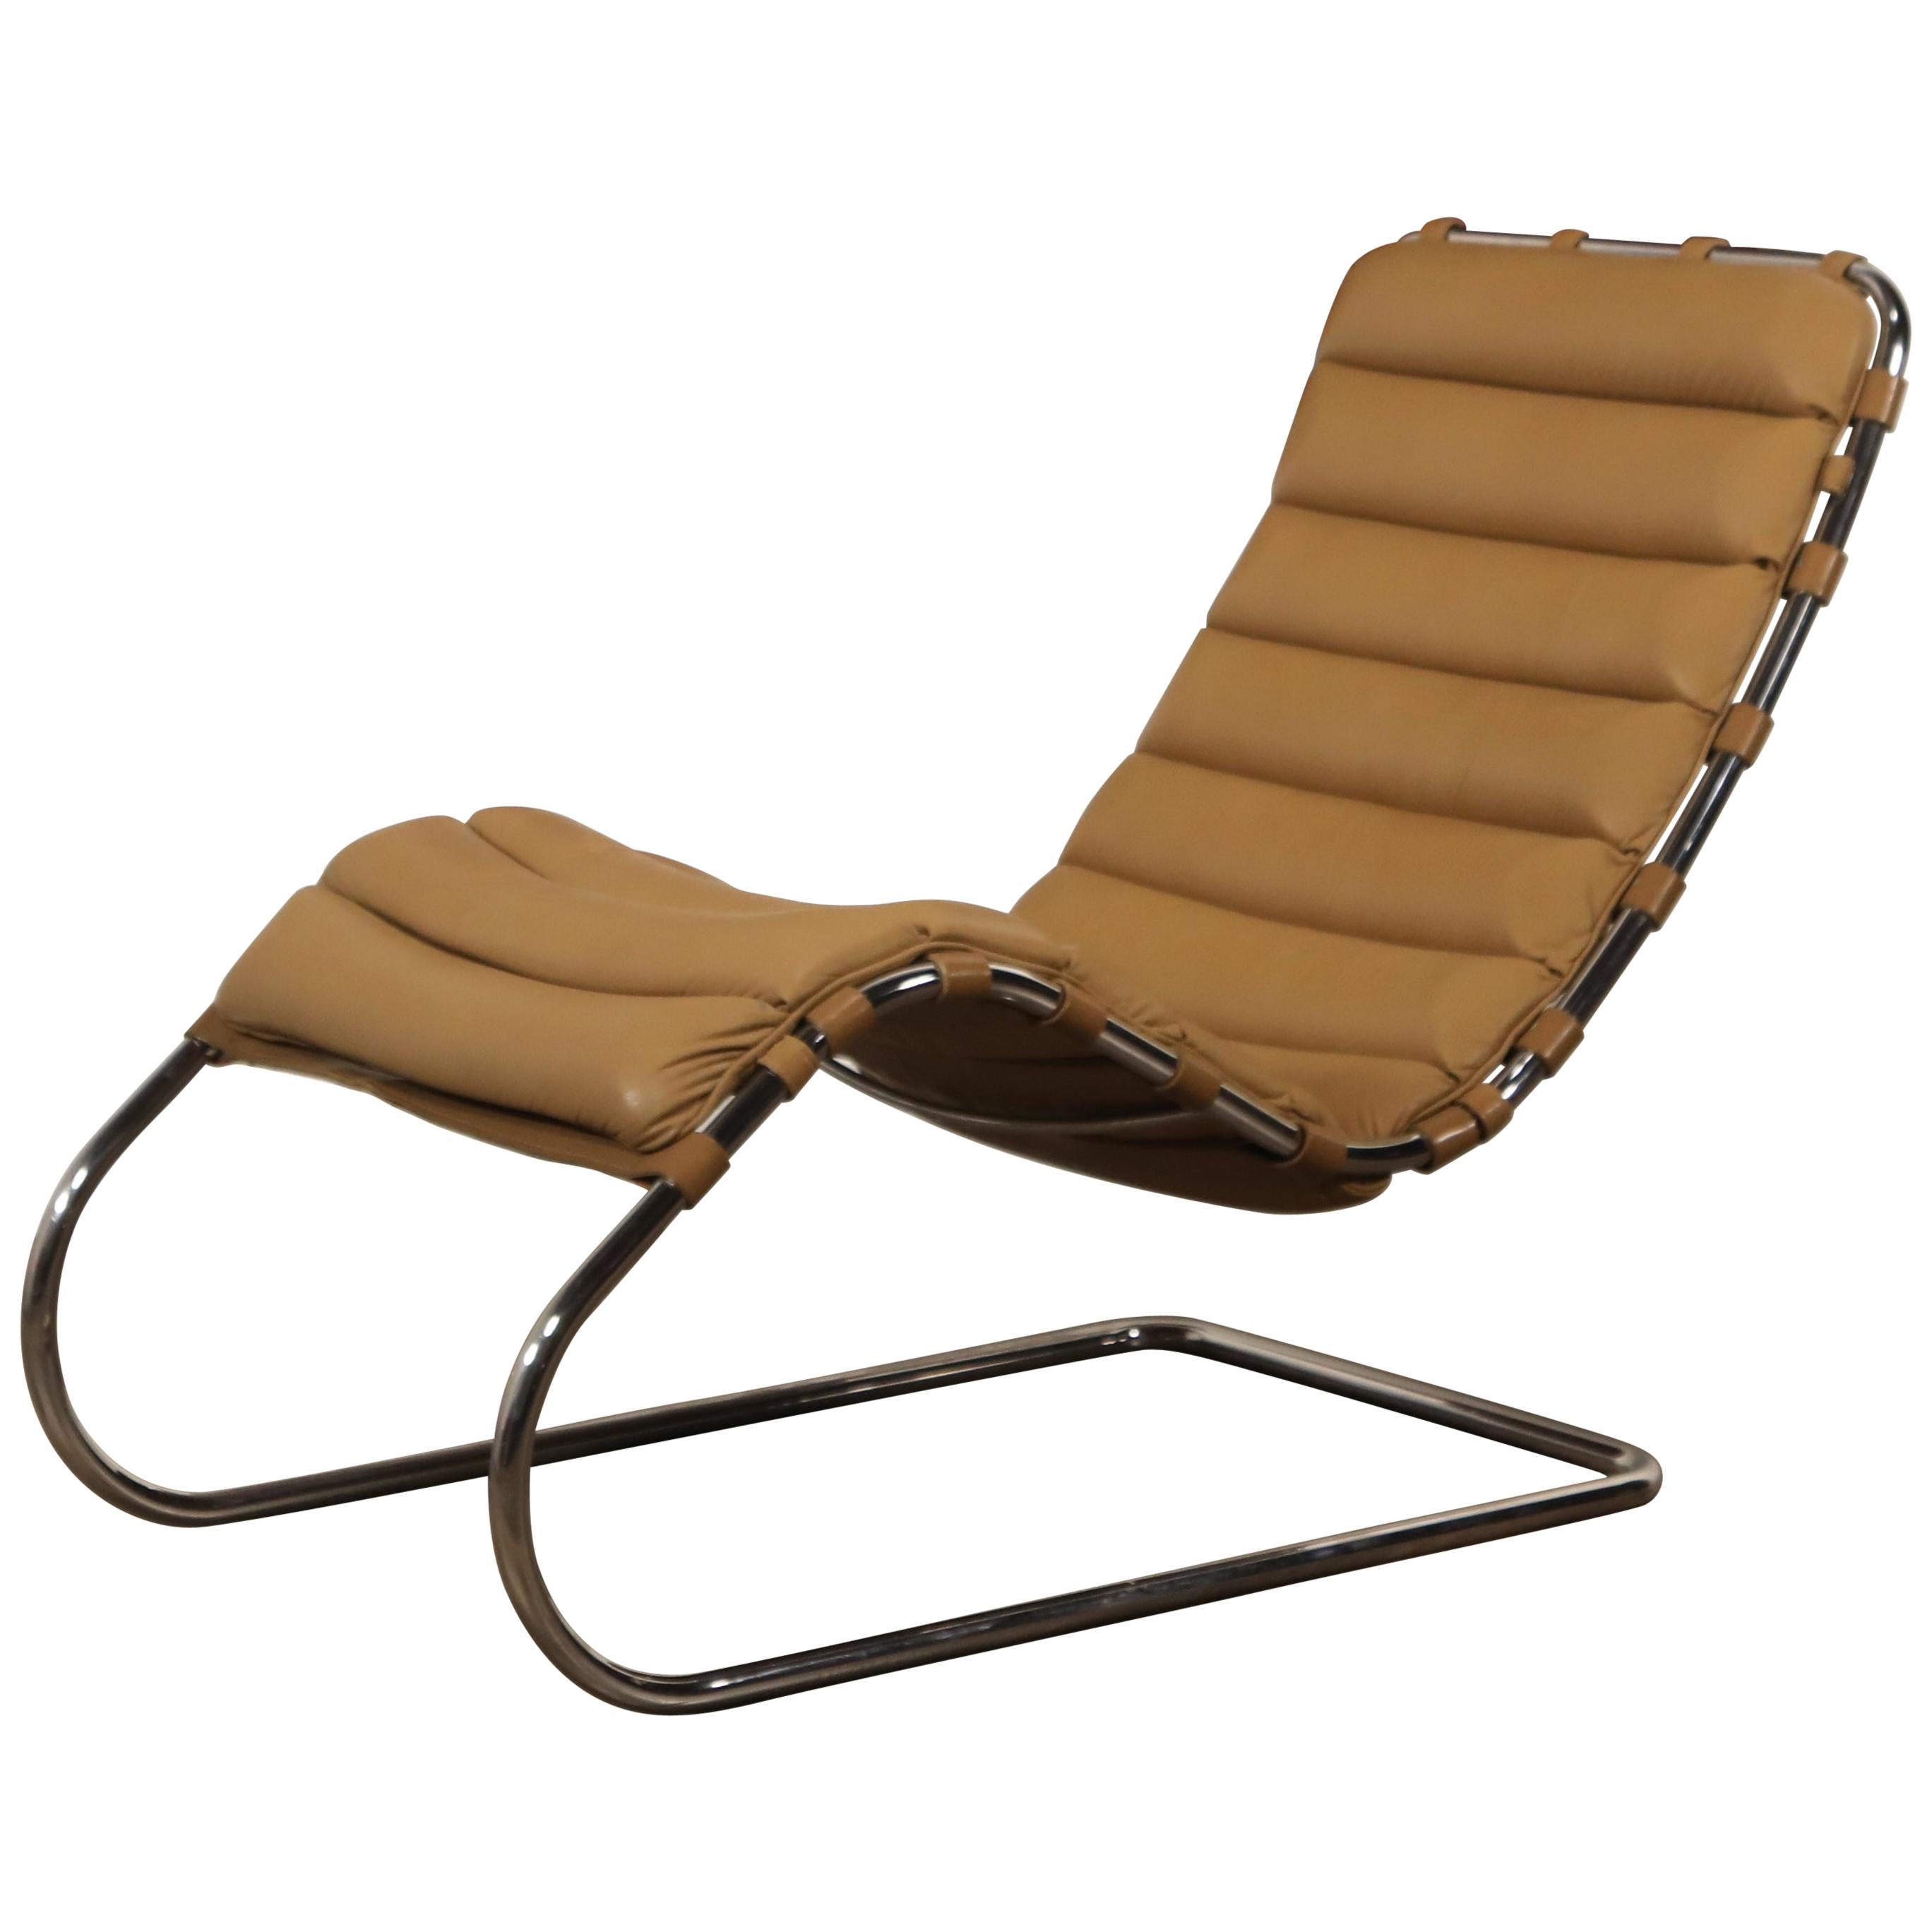 MR Chaise Lounge Chair by Mies van der Rohe for Knoll International, Signed 1978